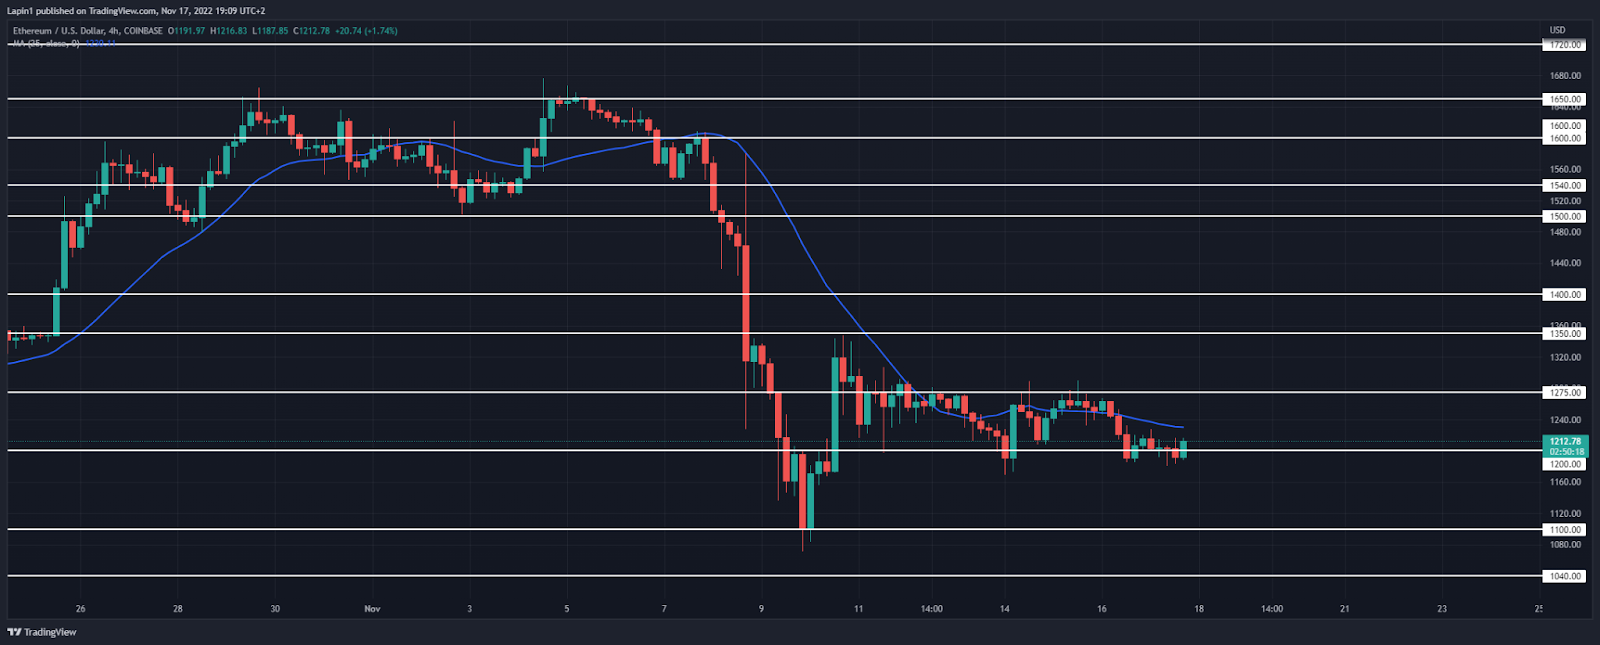 Ethereum price analysis: ETH finds support at $1,200, move higher next?